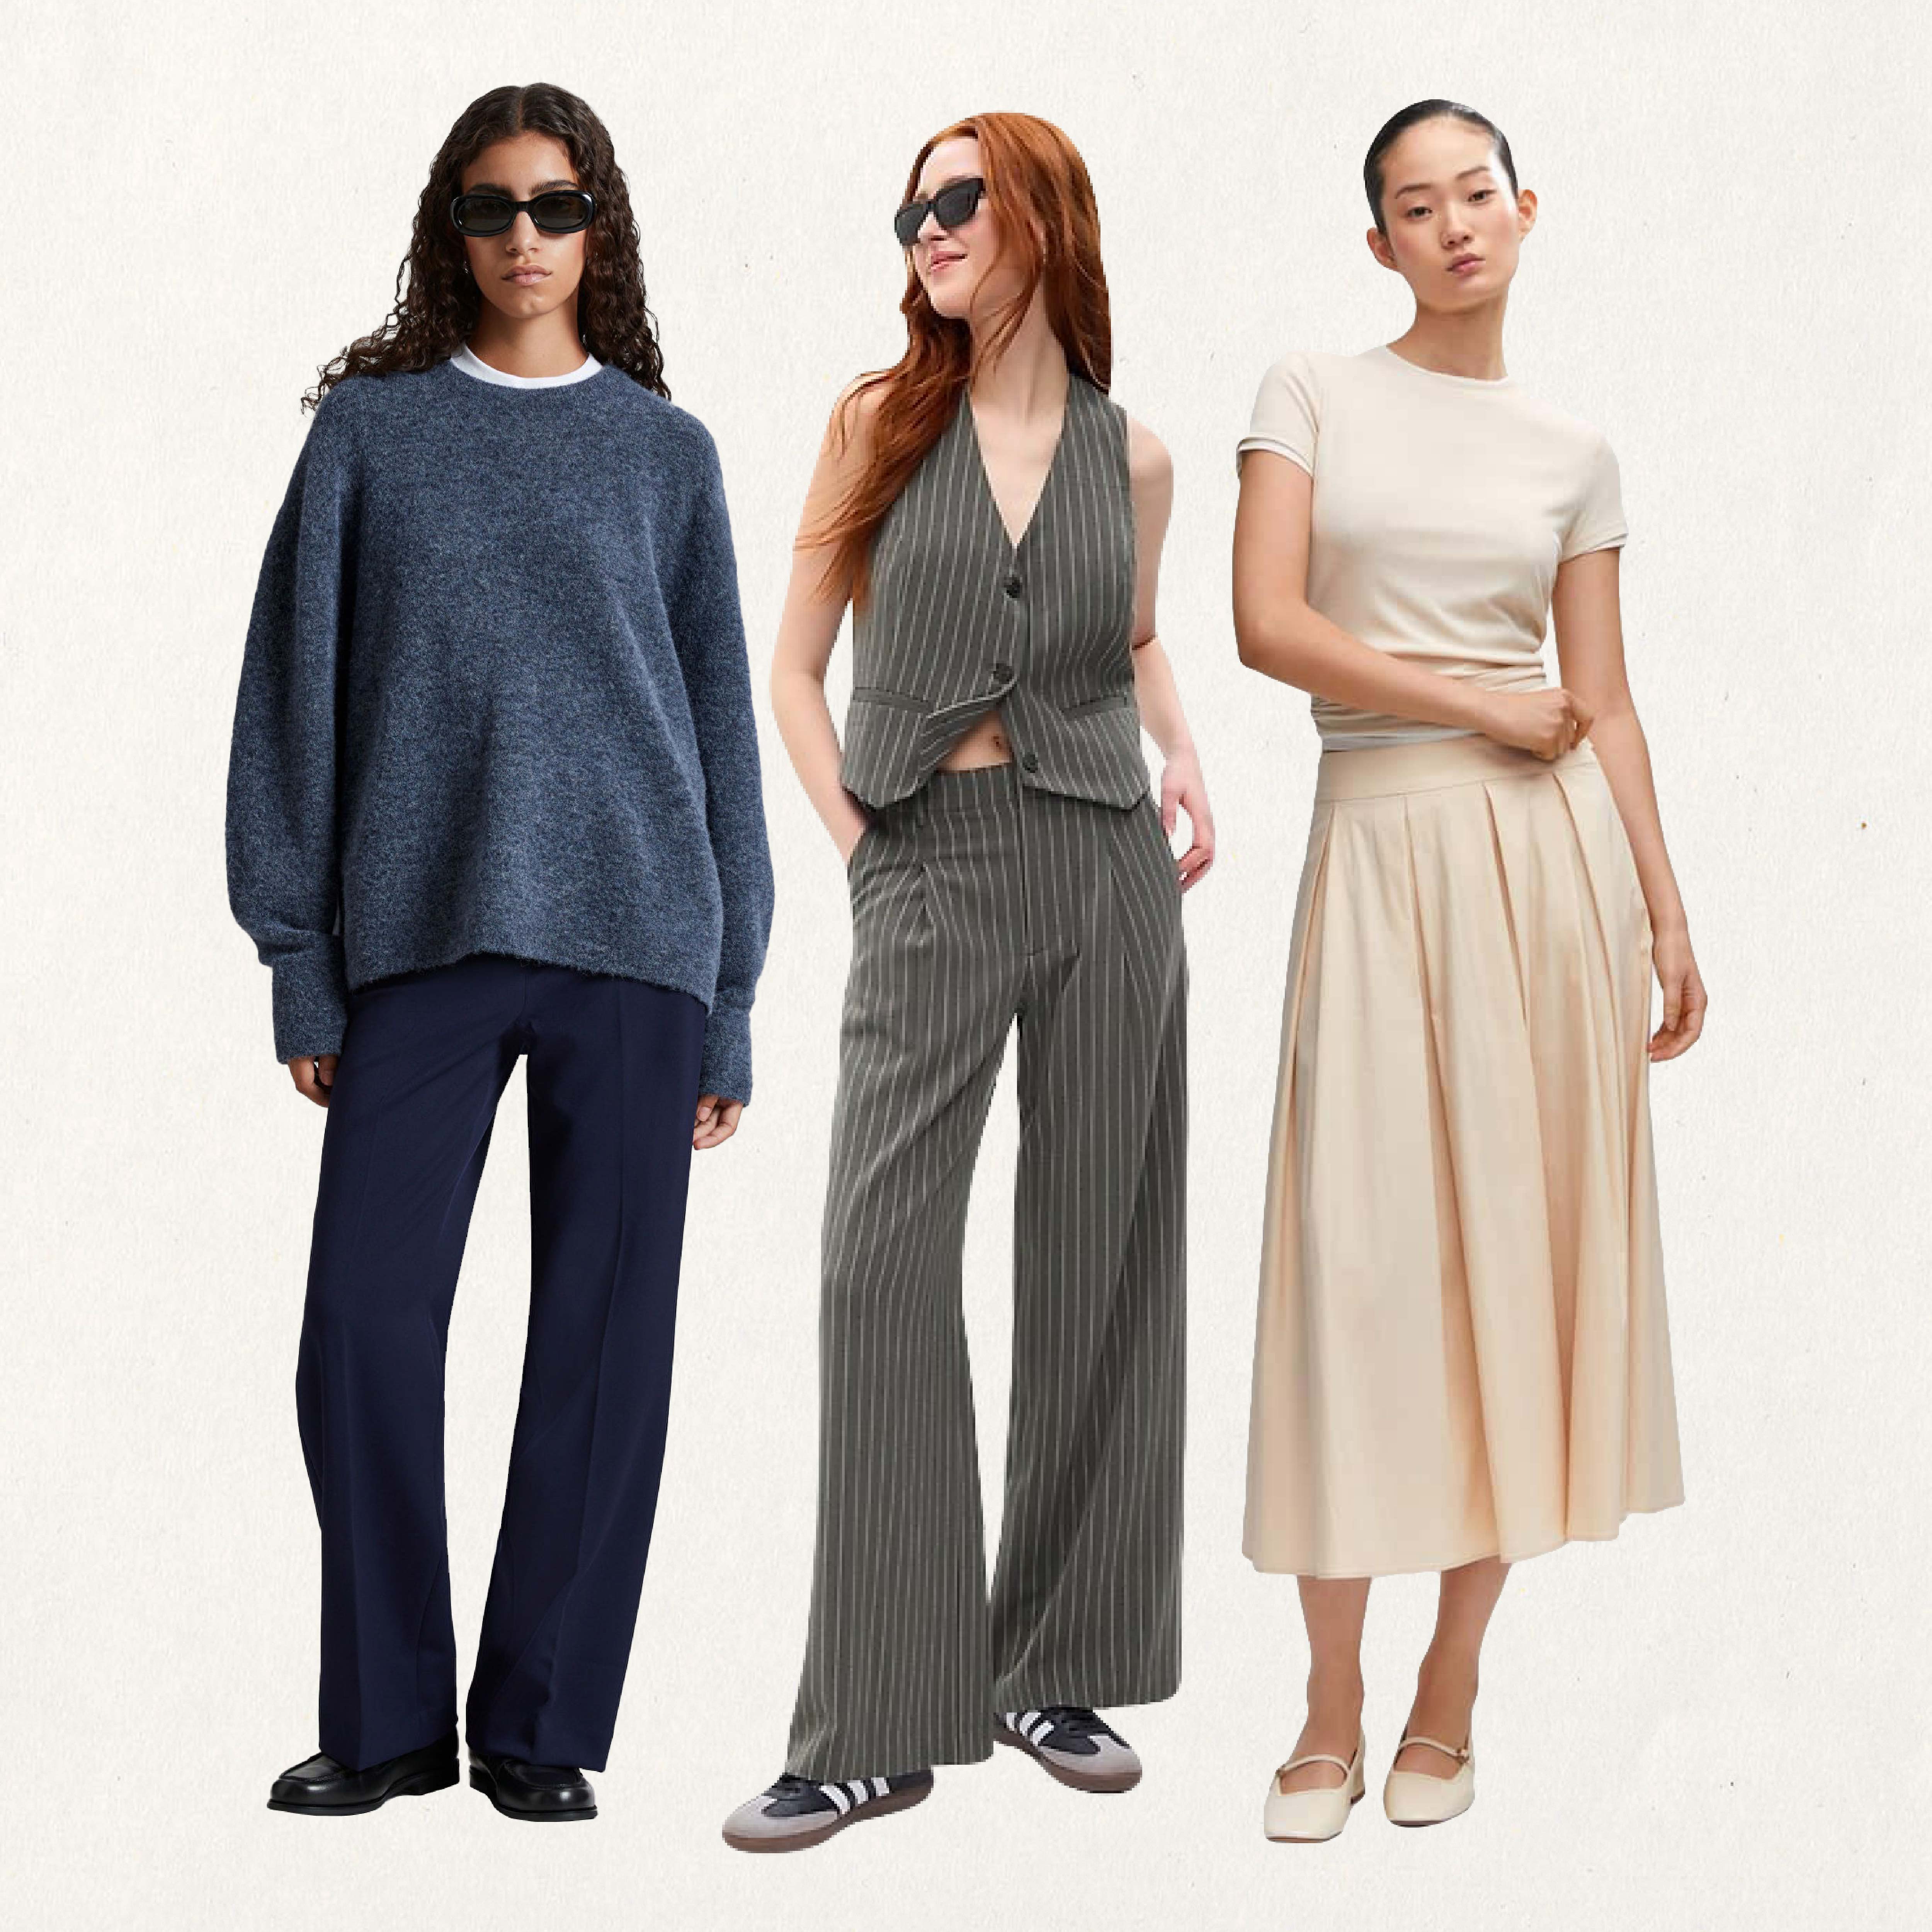 Fall Fashion to Wear to the Office